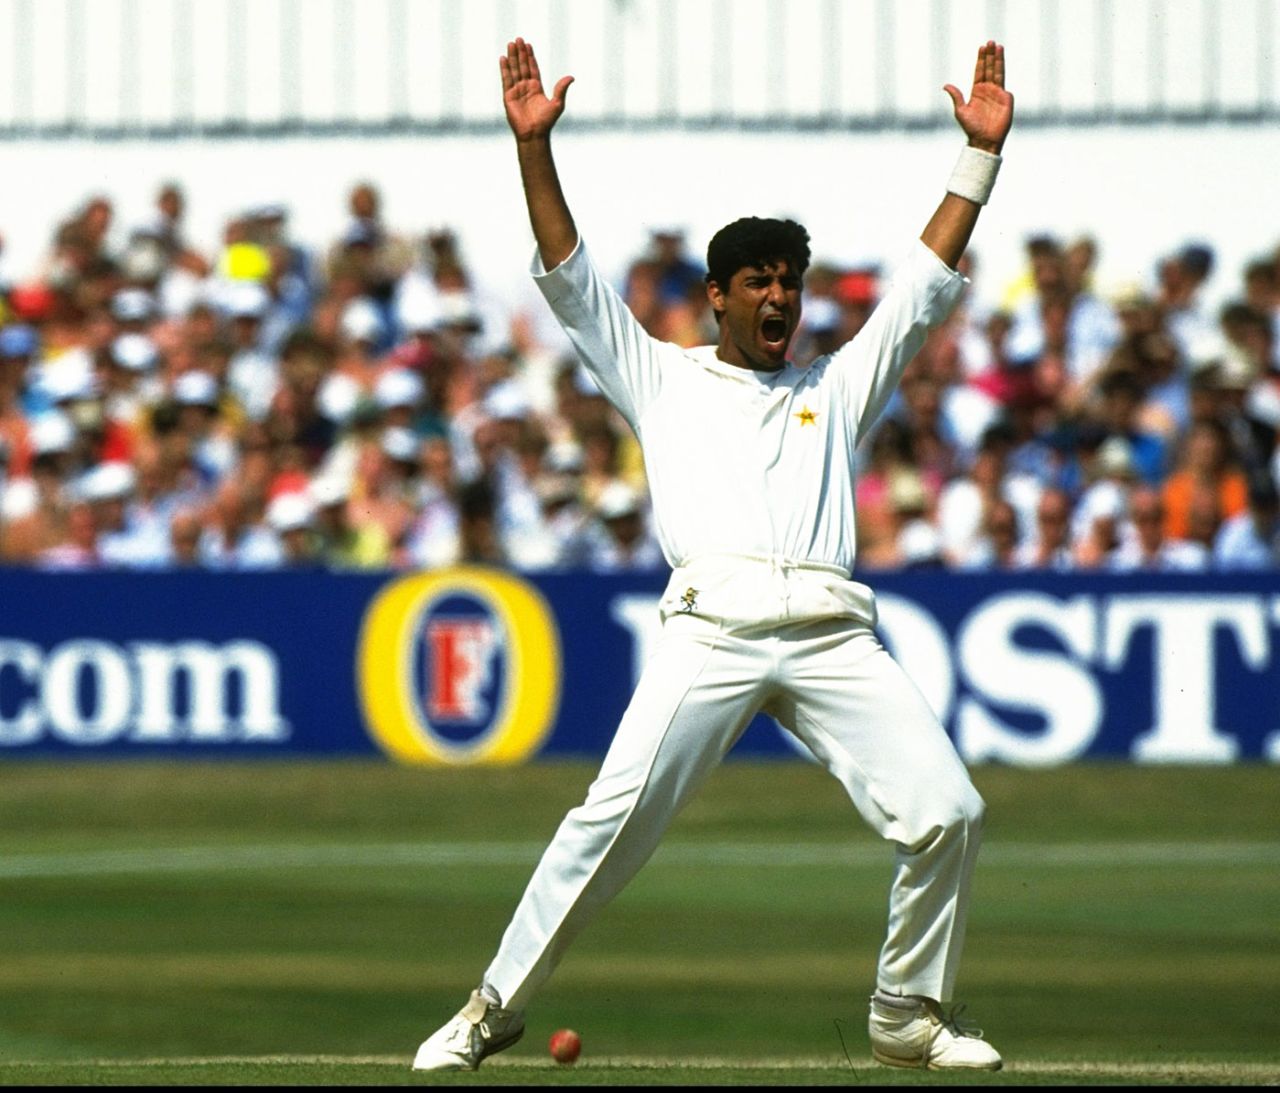 Waqar Younis appeals for a wicket, England v Pakistan, 4th Test, Headingley, 1st day, July 23, 1992